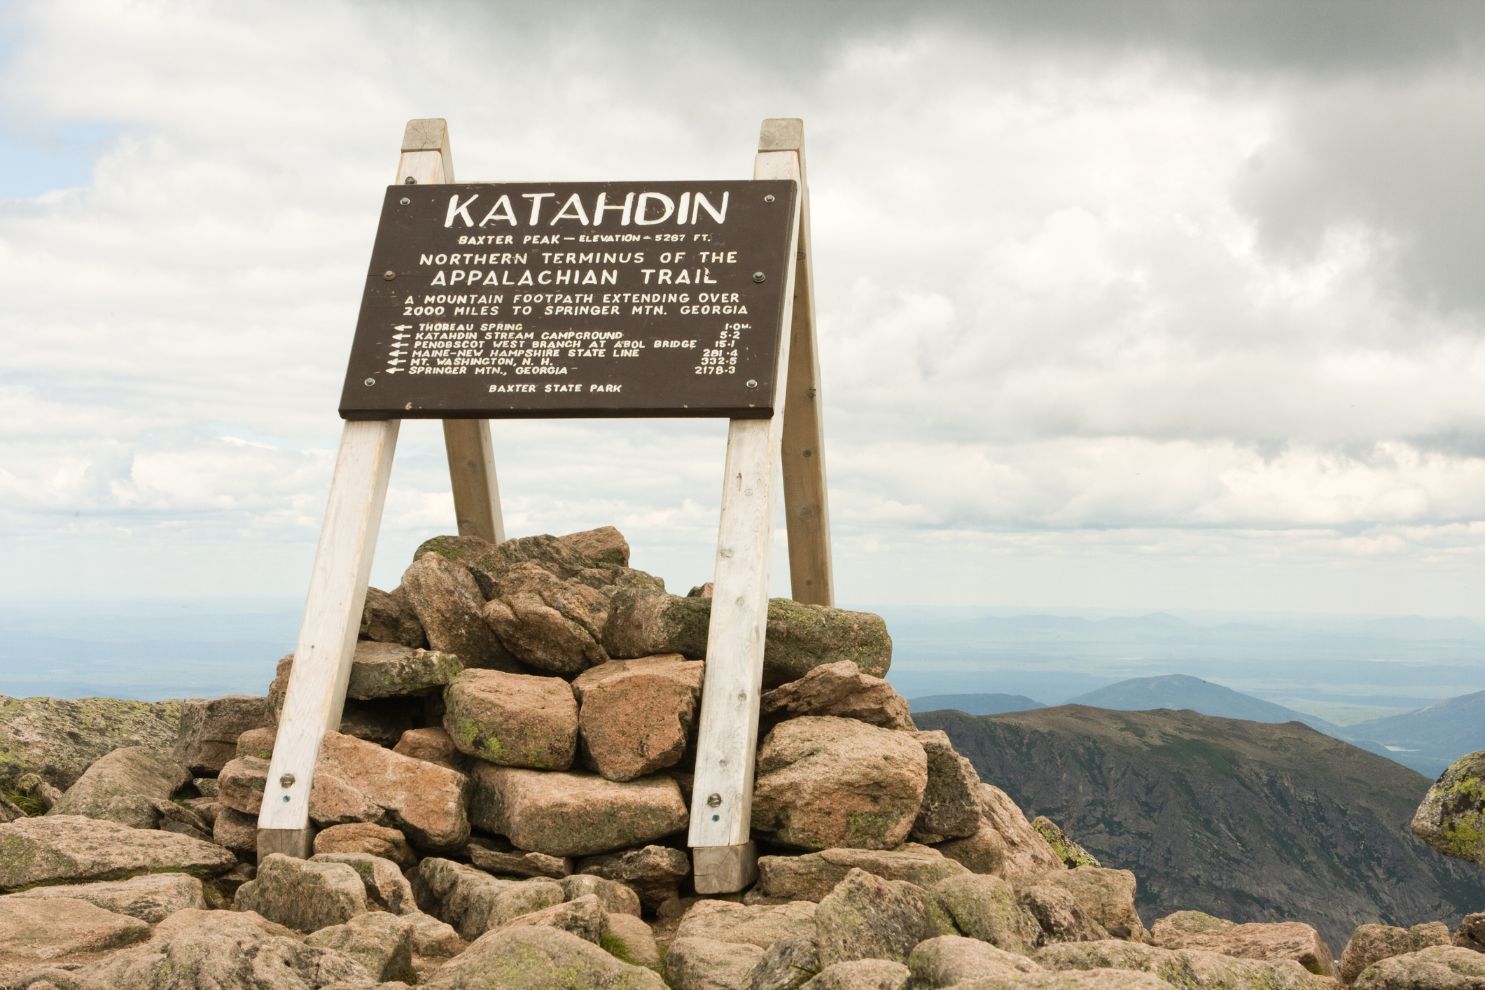 The Katahdin is the northern terminus of the Appalachian Trail. Photo: Getty